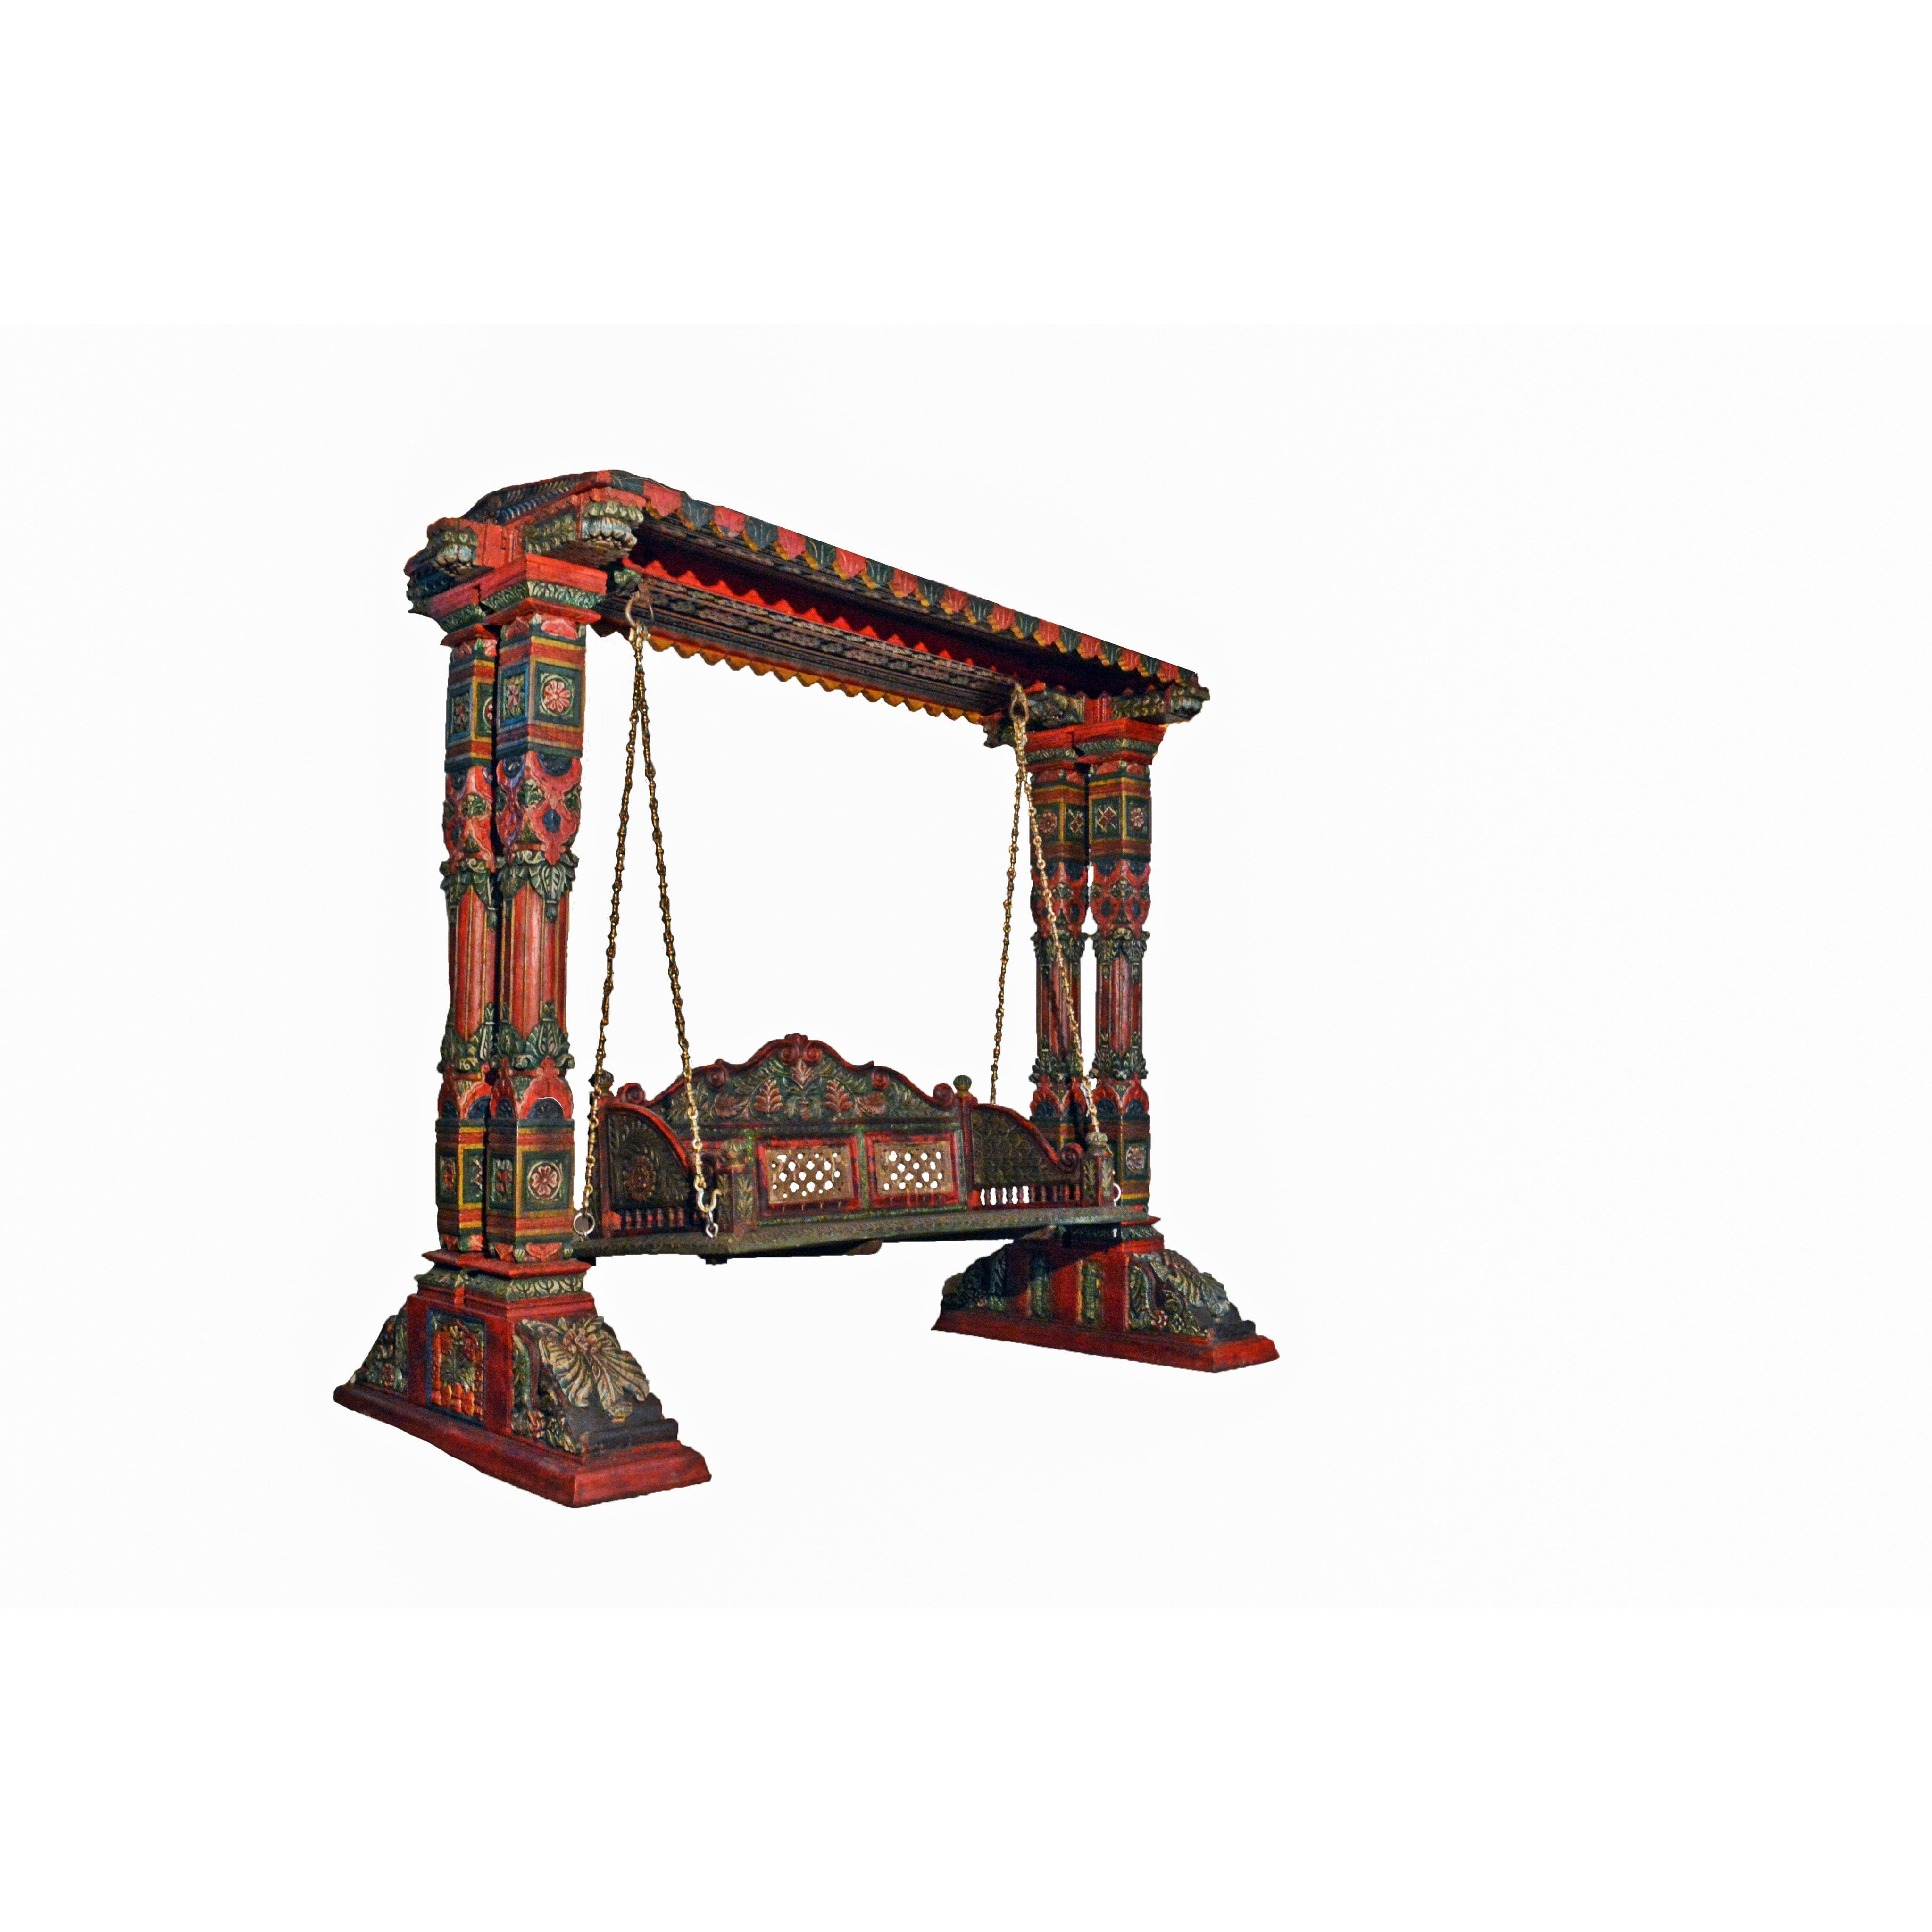 Two Pillar Design Painted Wooden Carved Royal Swing Set / Indoor Jhula